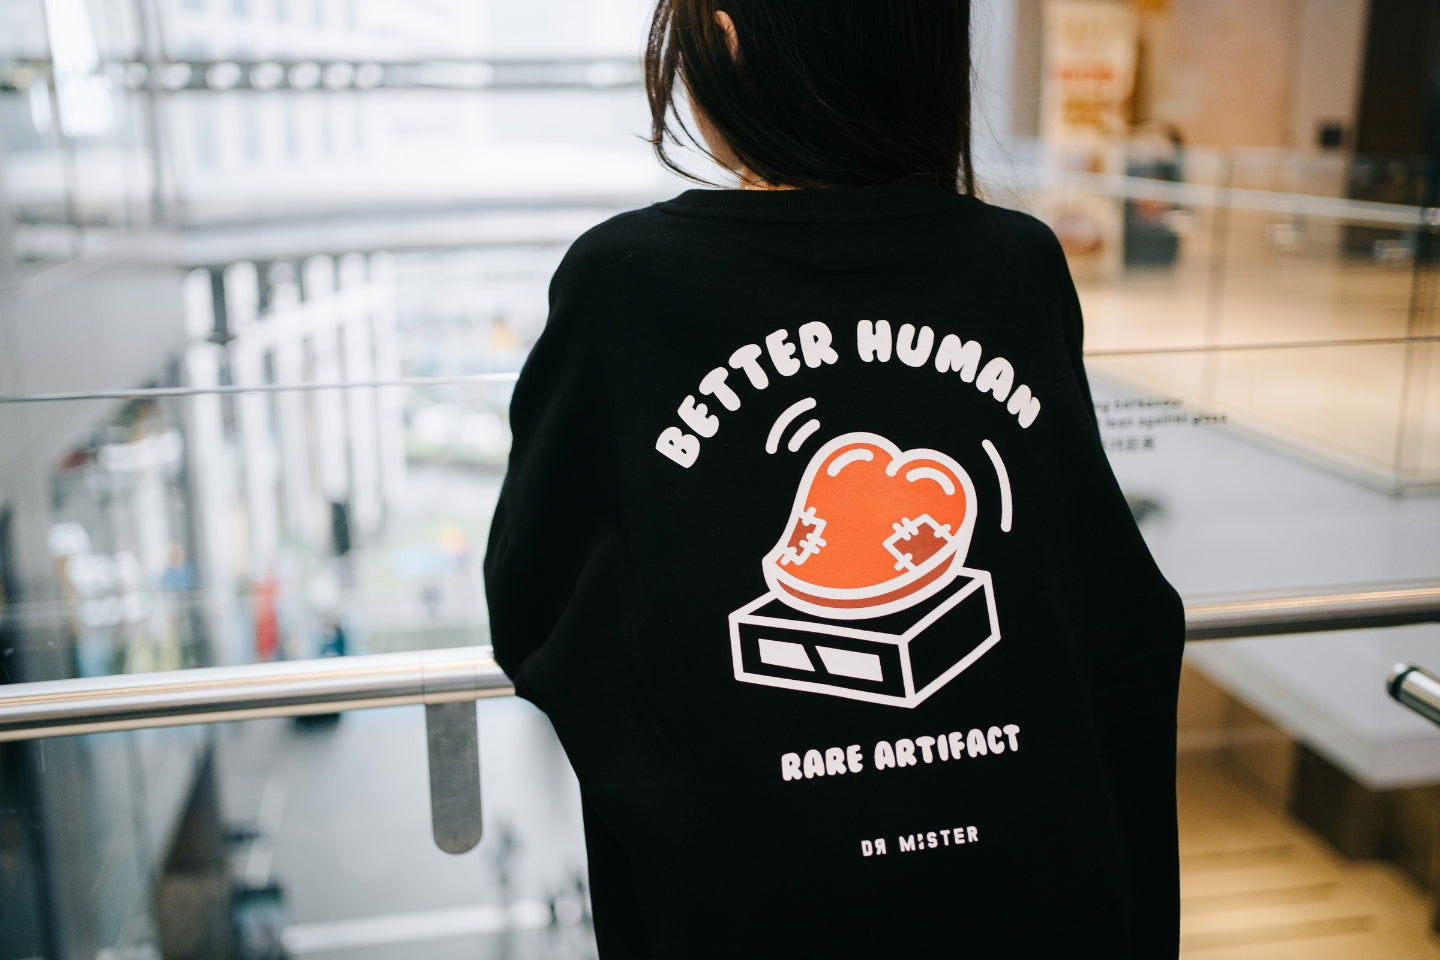 23 - Two New Colours added for "Better Human" Rare Artifact Sweatshirt